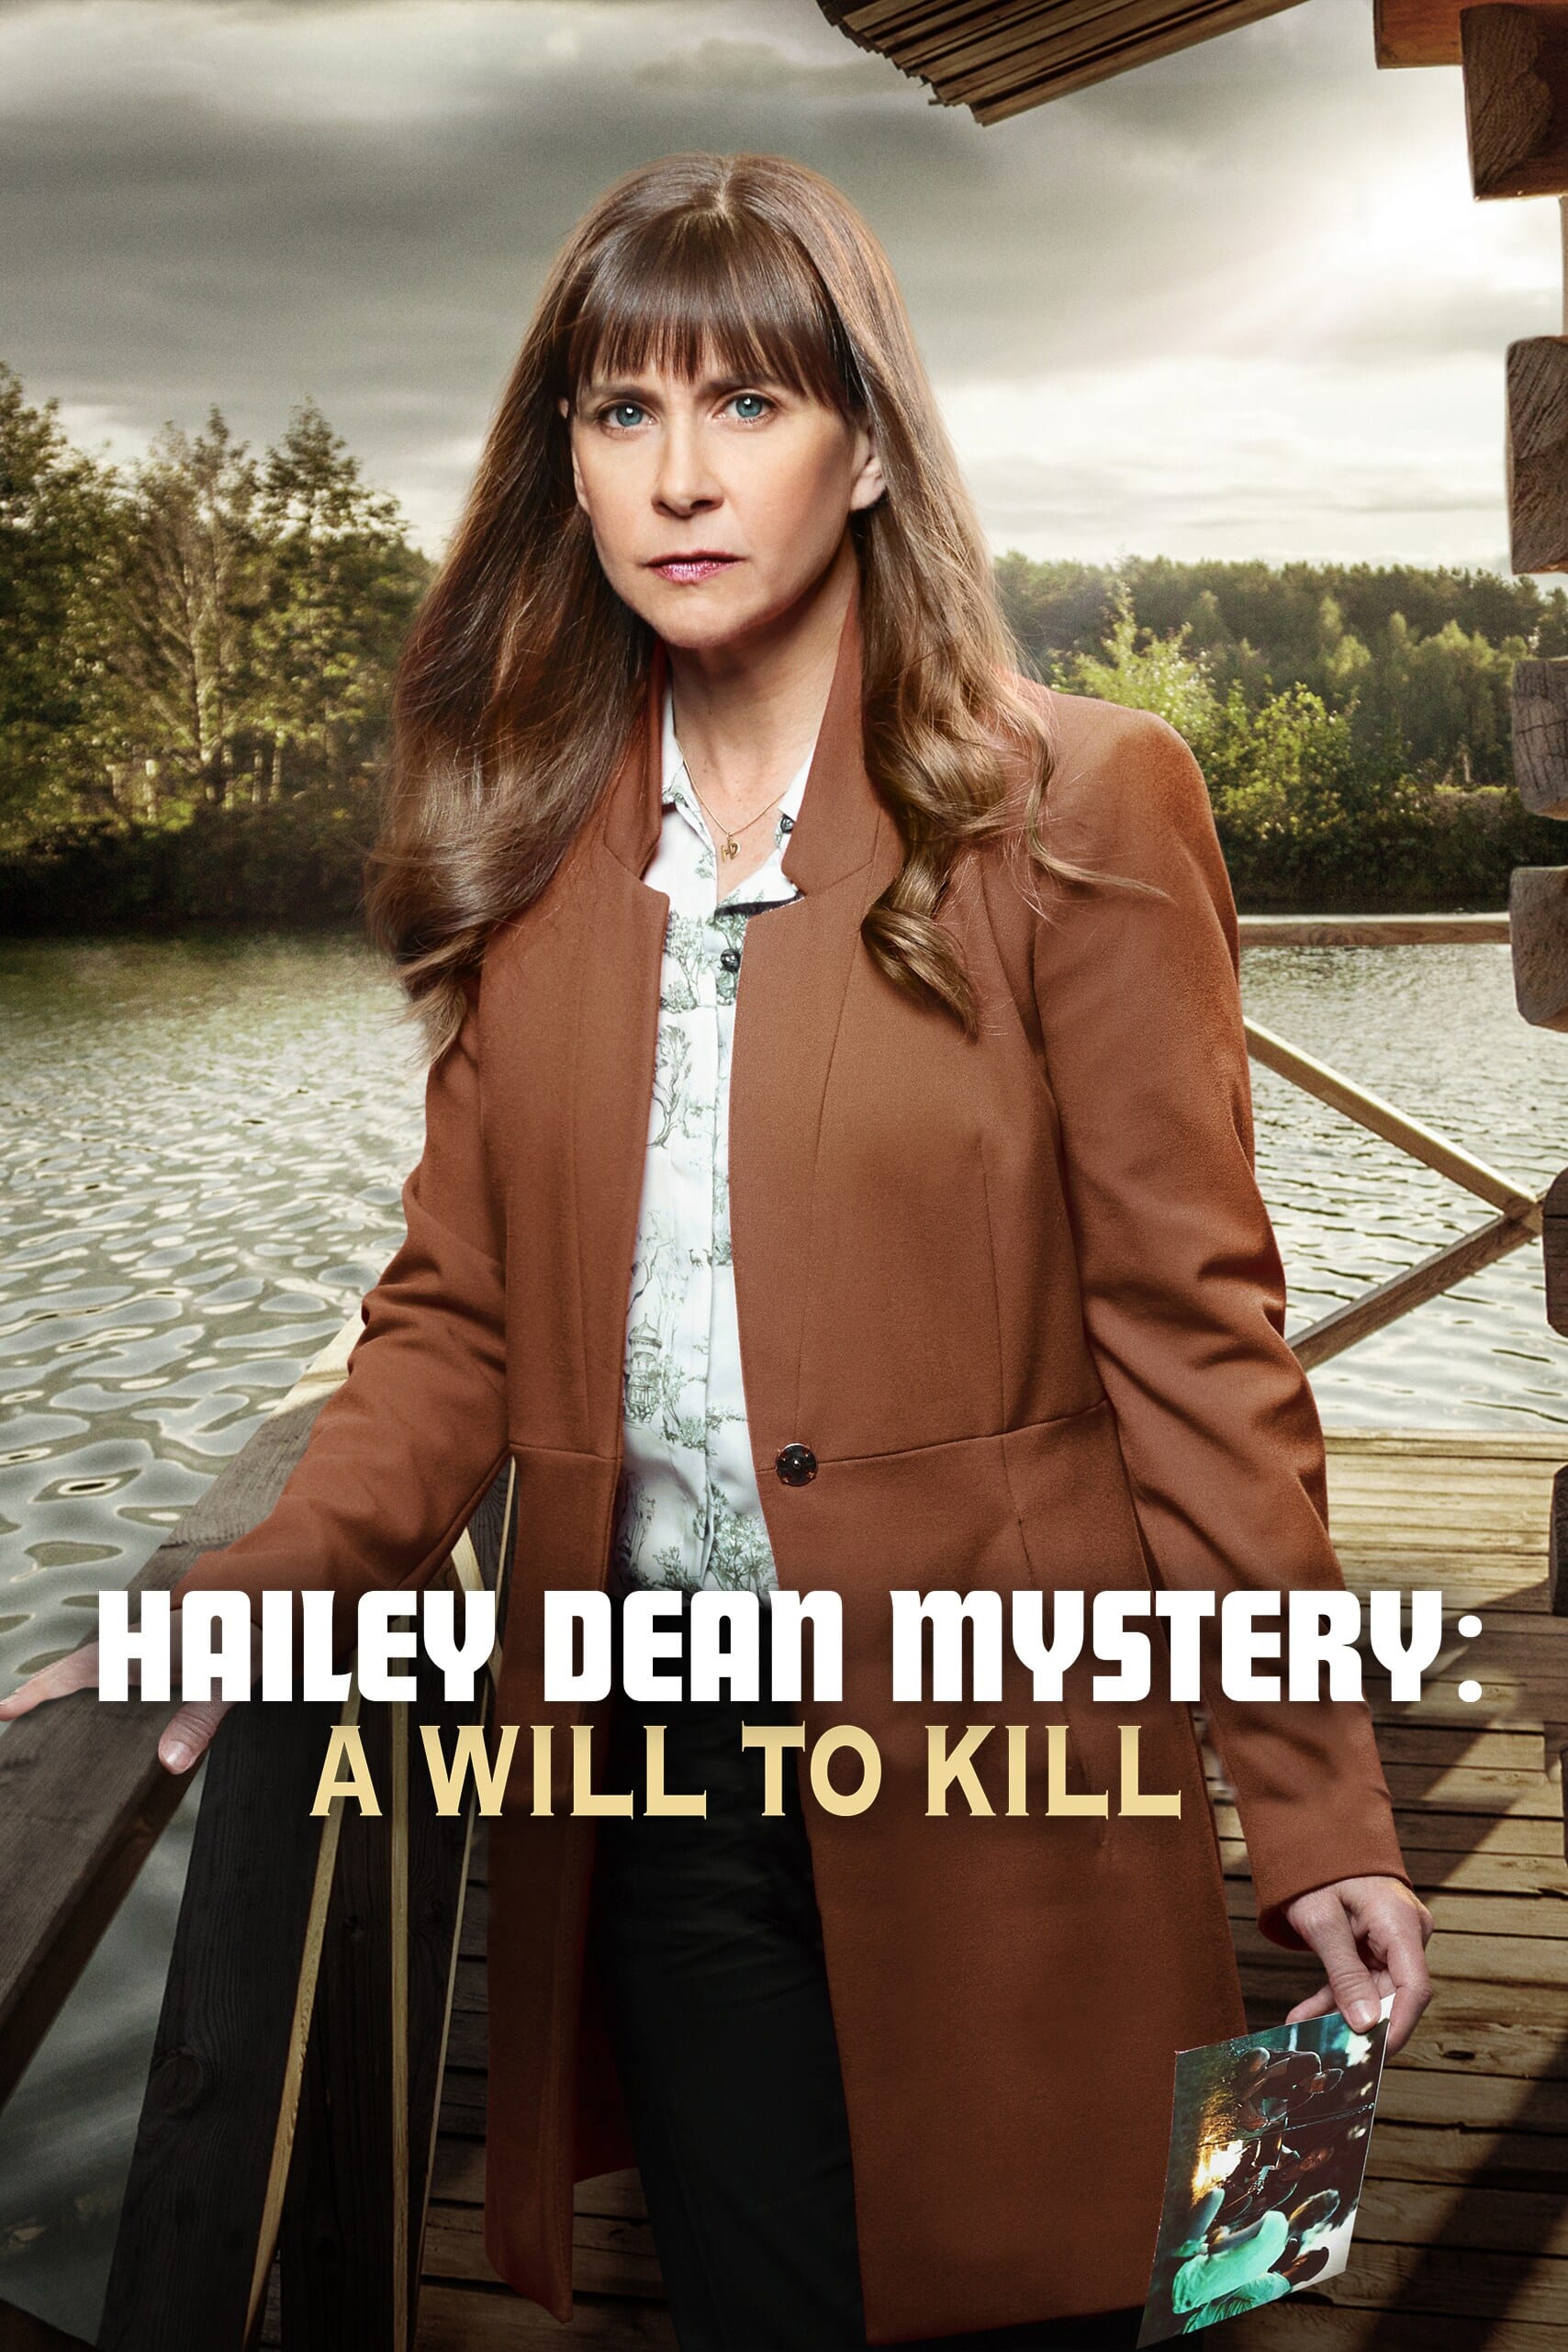 Hailey Dean Mysteries: A Marriage Made for Murder